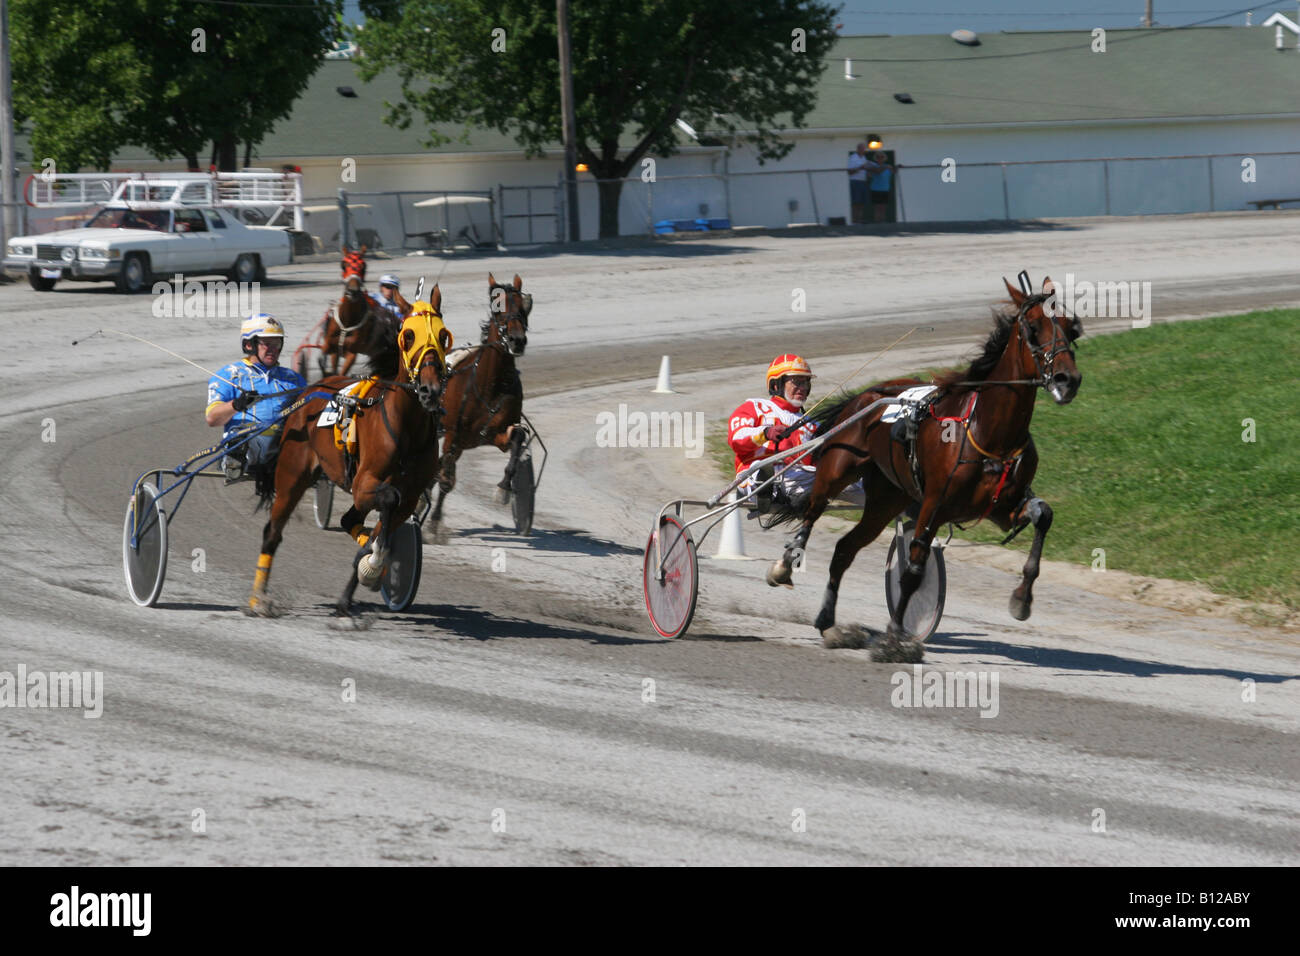 Harness Racing Horse Racing Canfield Fair Canfield Ohio Mahoning County Fair Stock Photo